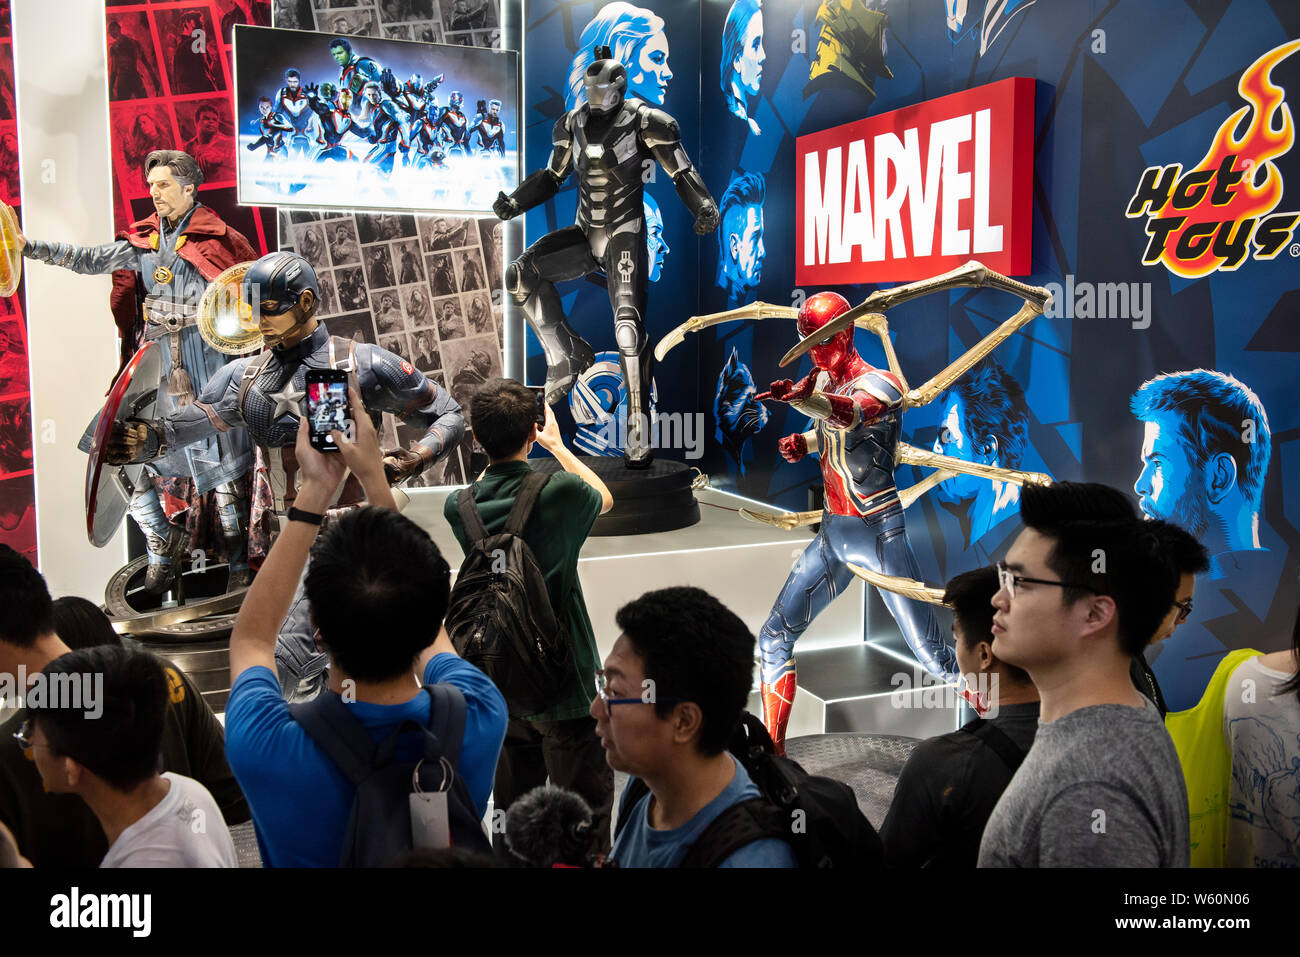 Visitors and customers seen looking at Marvel Avengers movie character  figures at Disney's Marvel Studio booth during the Ani-Com & Games event in  Hong Kong Stock Photo - Alamy